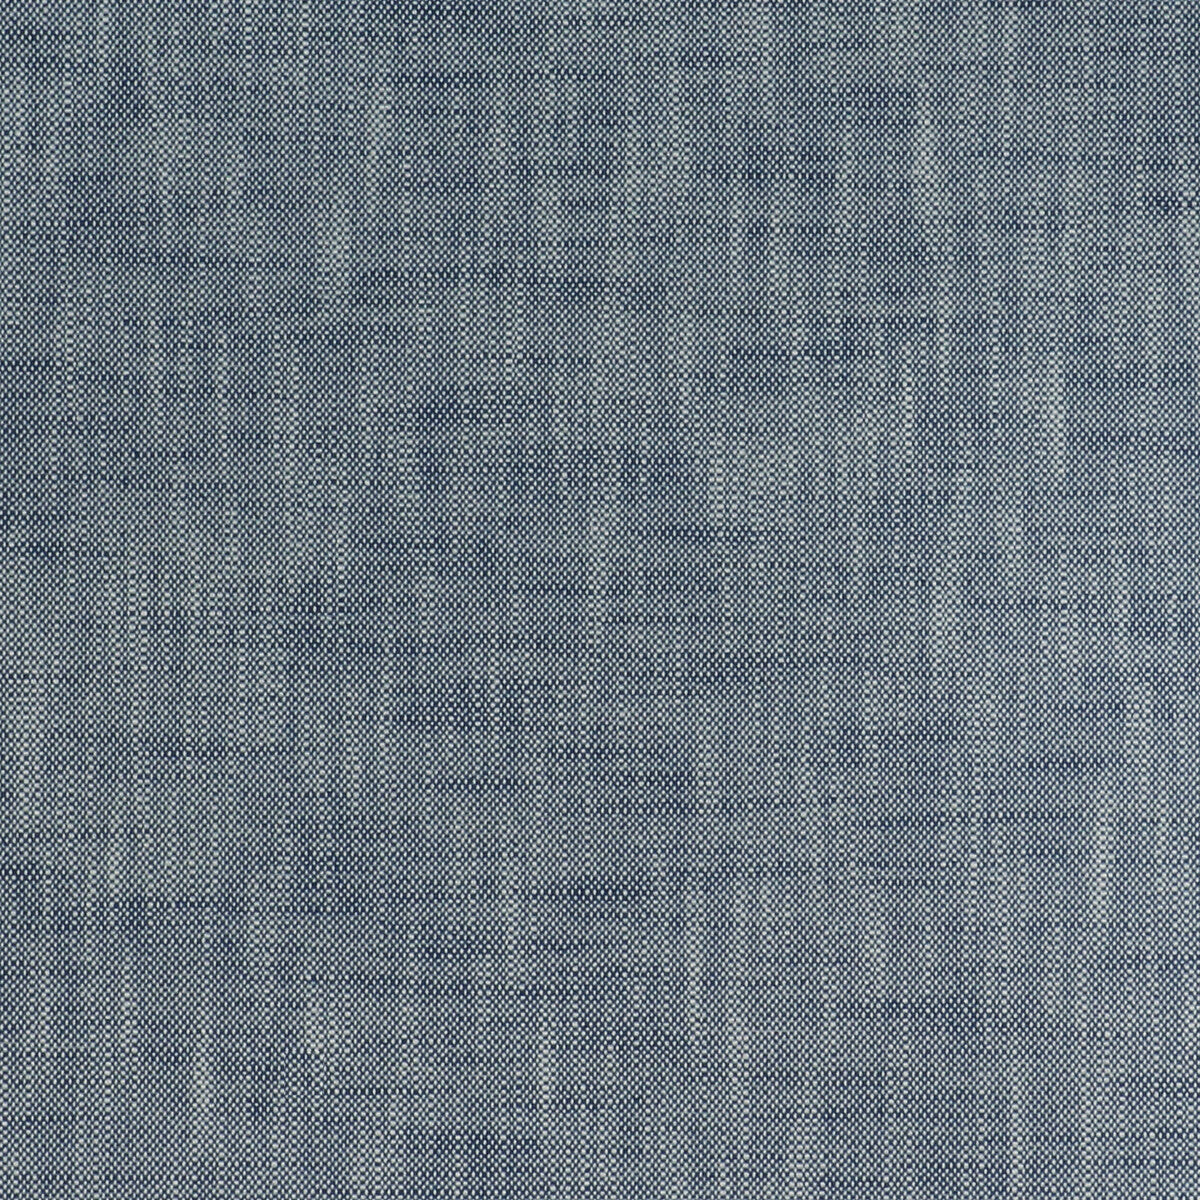 Kravet Smart fabric in 35517-505 color - pattern 35517.505.0 - by Kravet Smart in the Inside Out Performance Fabrics collection